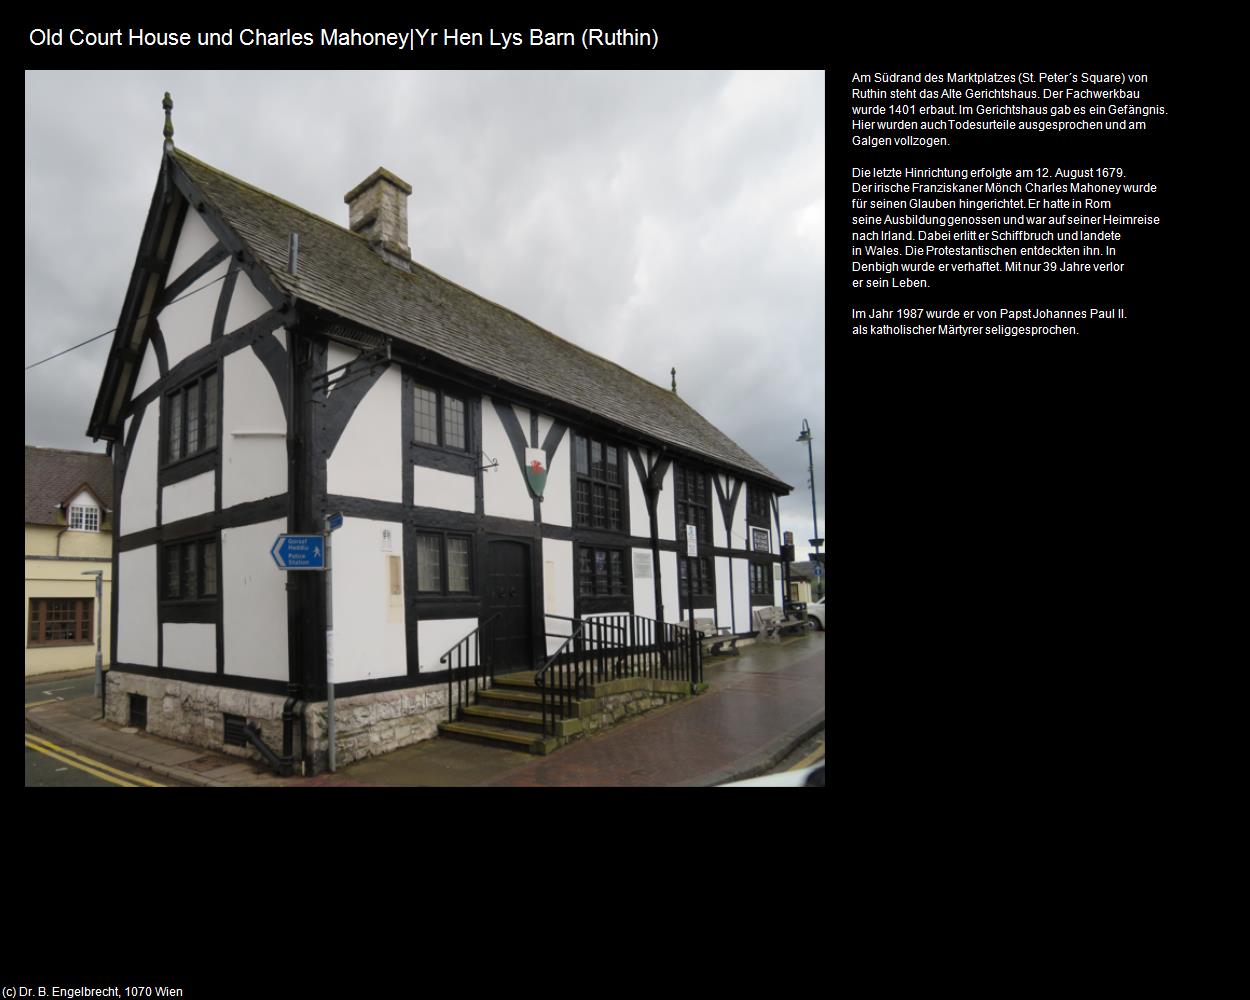 Old Court House und Charles Mahoney|Yr Hen Lys Barn  (Ruthin, Wales) in Kulturatlas-ENGLAND und WALES